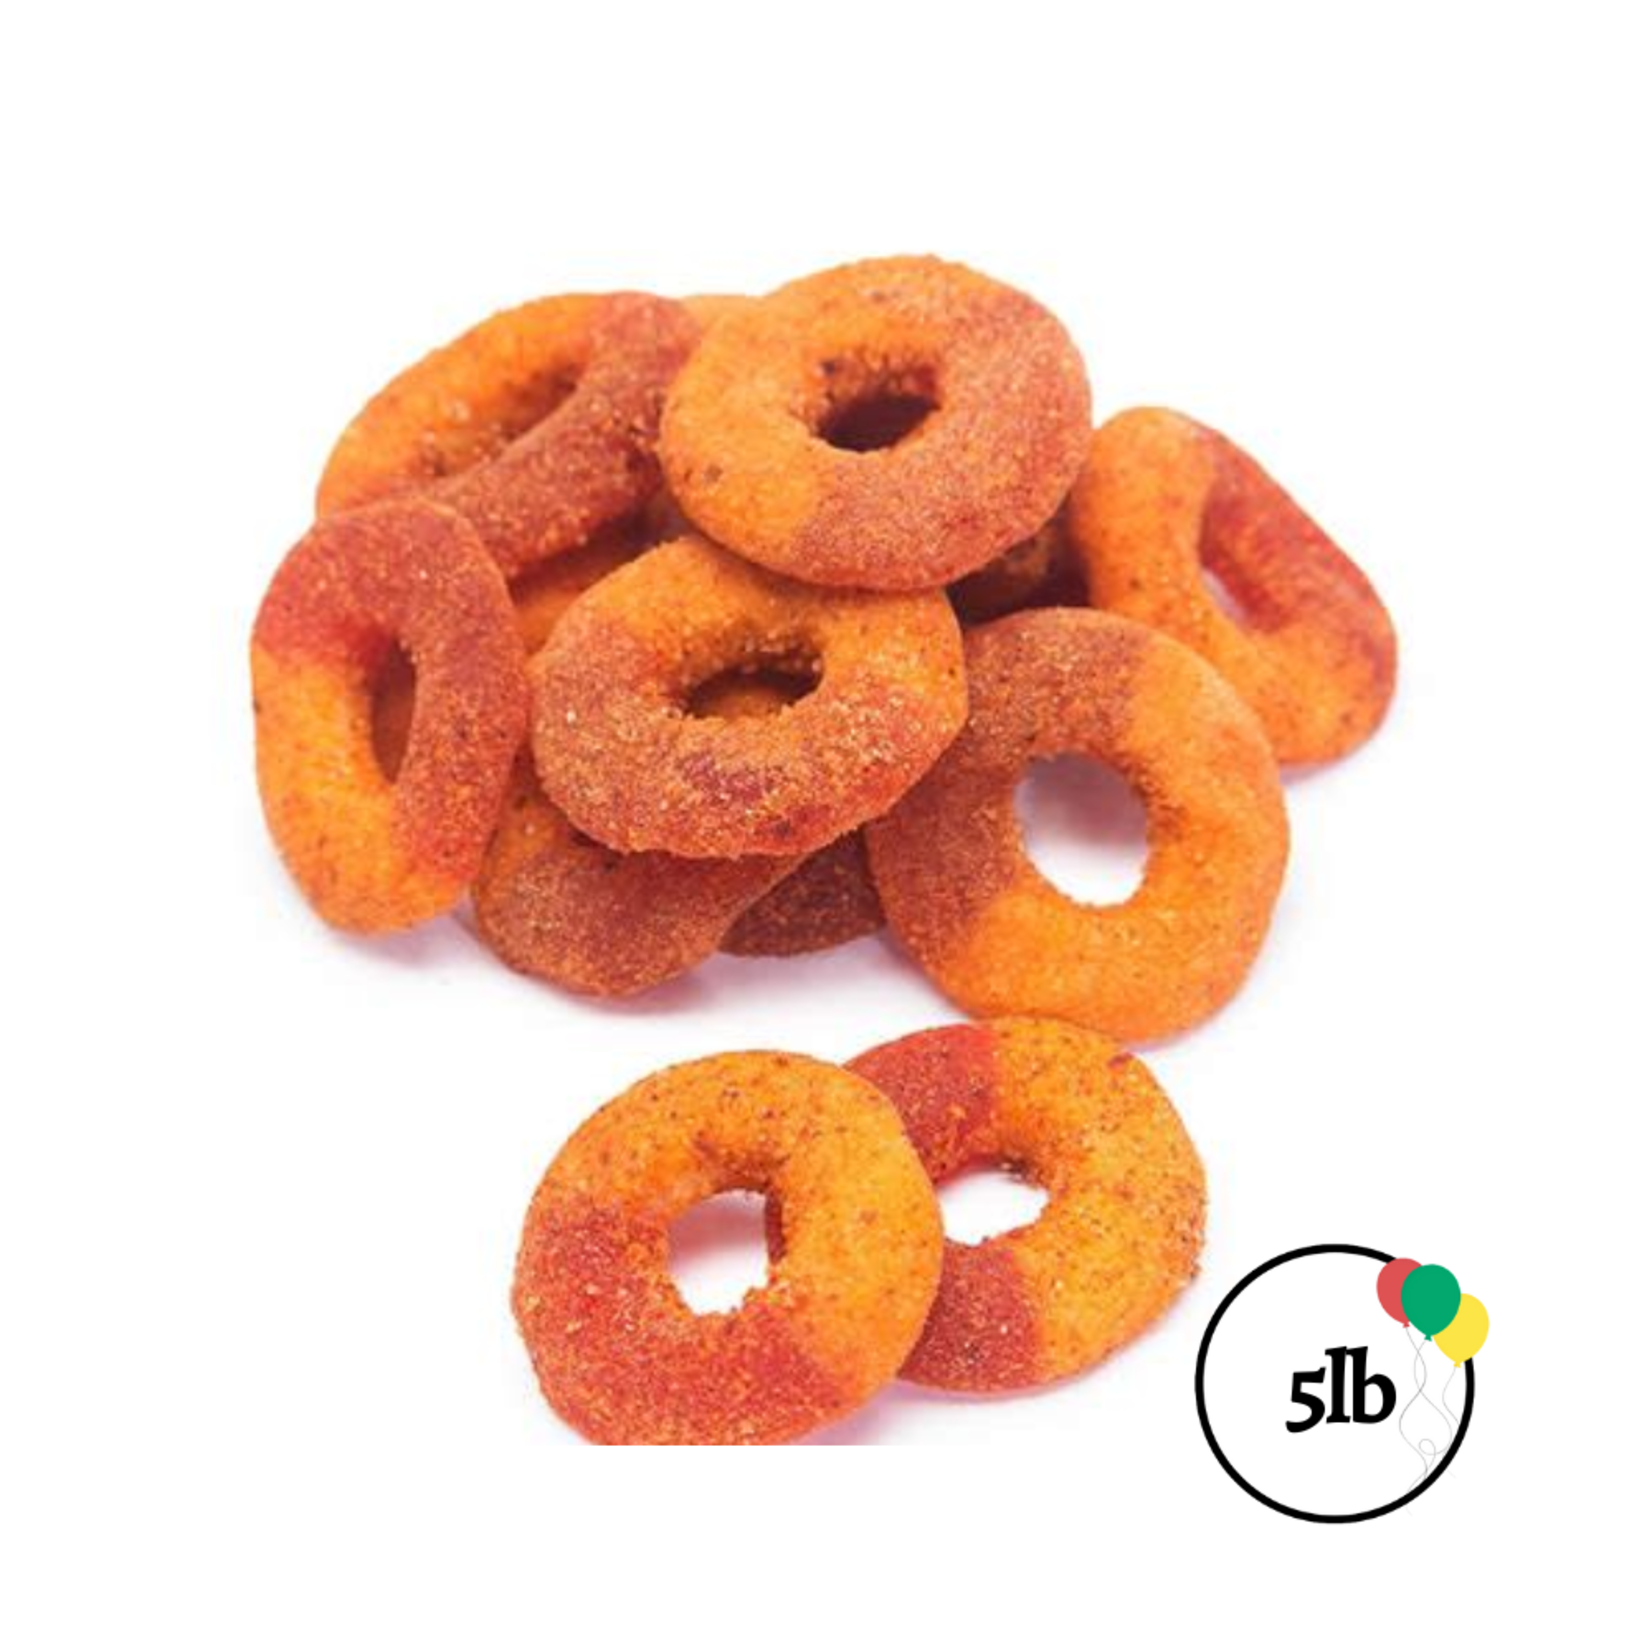 Jovy Jovy Peach Rings with Chamoy & Chili 5lbs